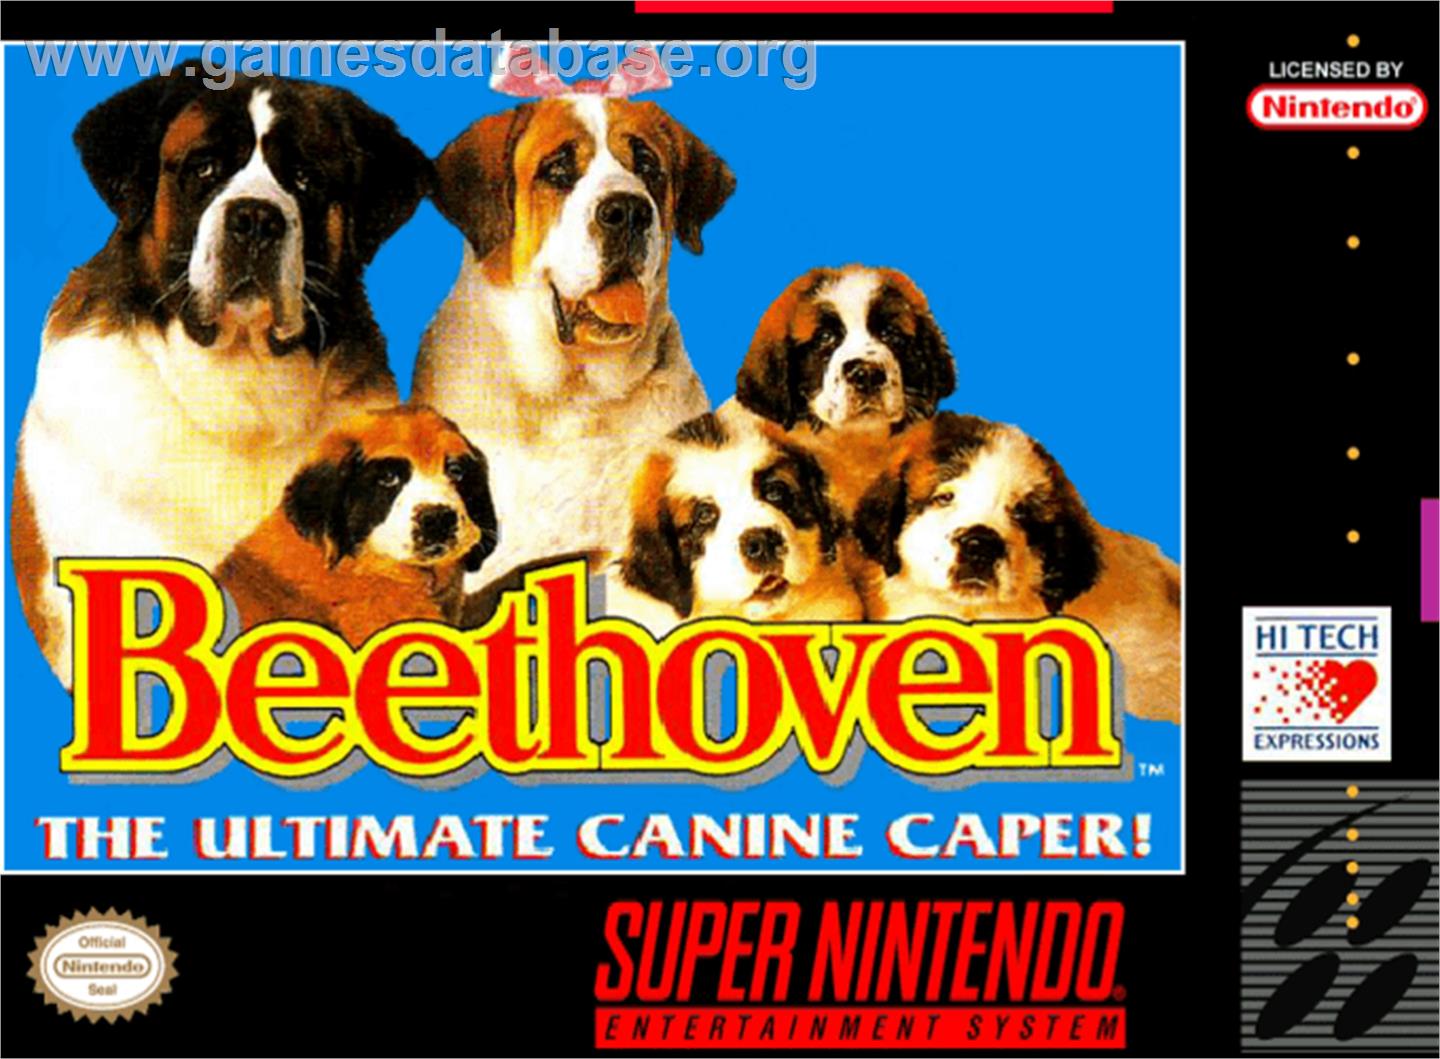 Beethoven's 2nd: The Ultimate Canine Caper! - Nintendo SNES - Artwork - Box